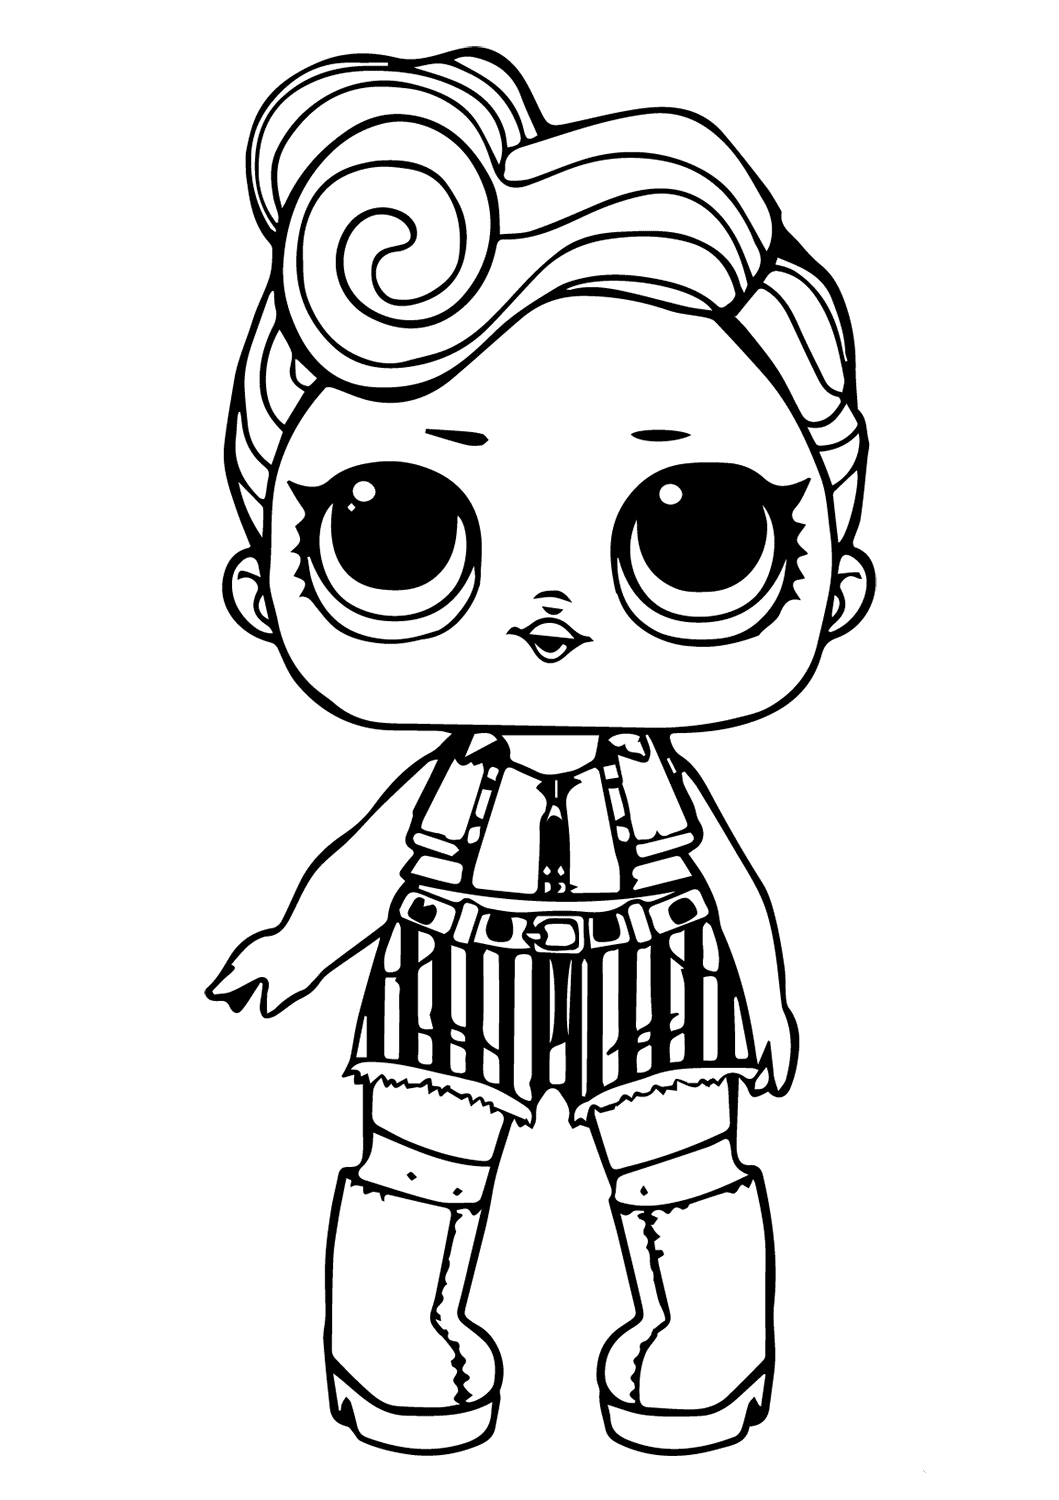 Download 40 Free Printable Lol Surprise Dolls Coloring Pages